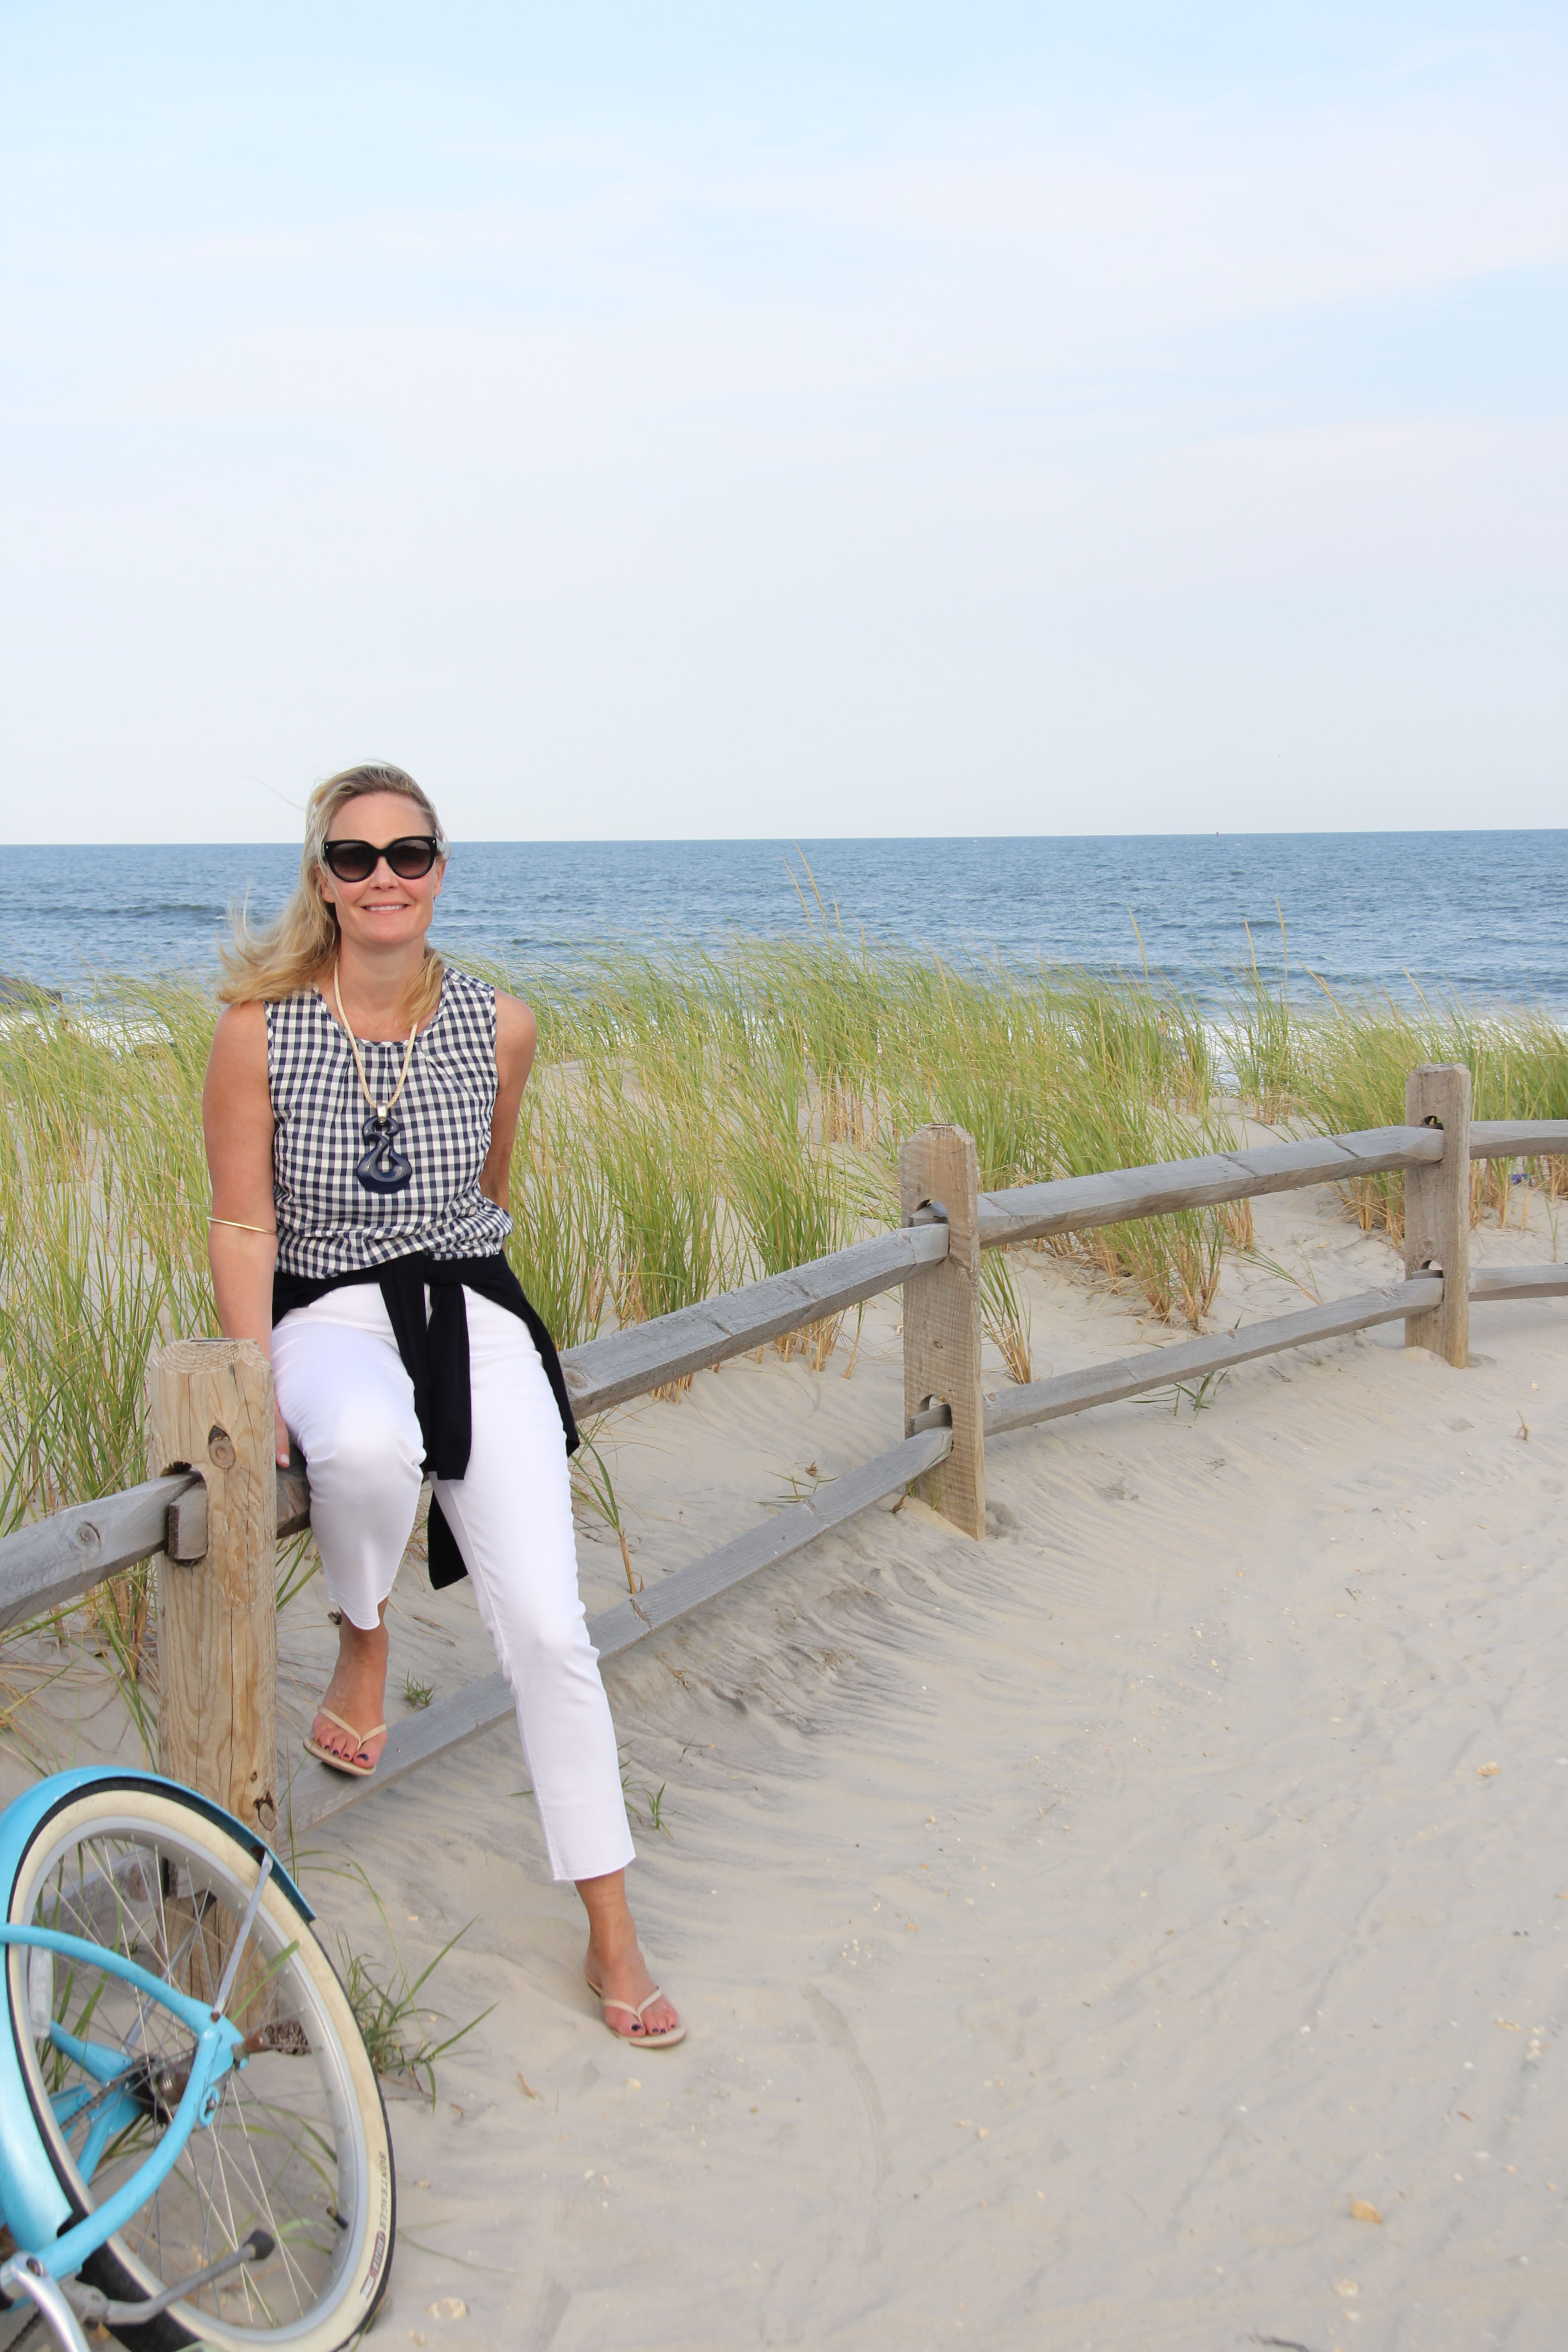 This week Ridgely Brode took her new frayed hem jeans for a spin at the beach and share them on her blog, Ridgely's Radar.